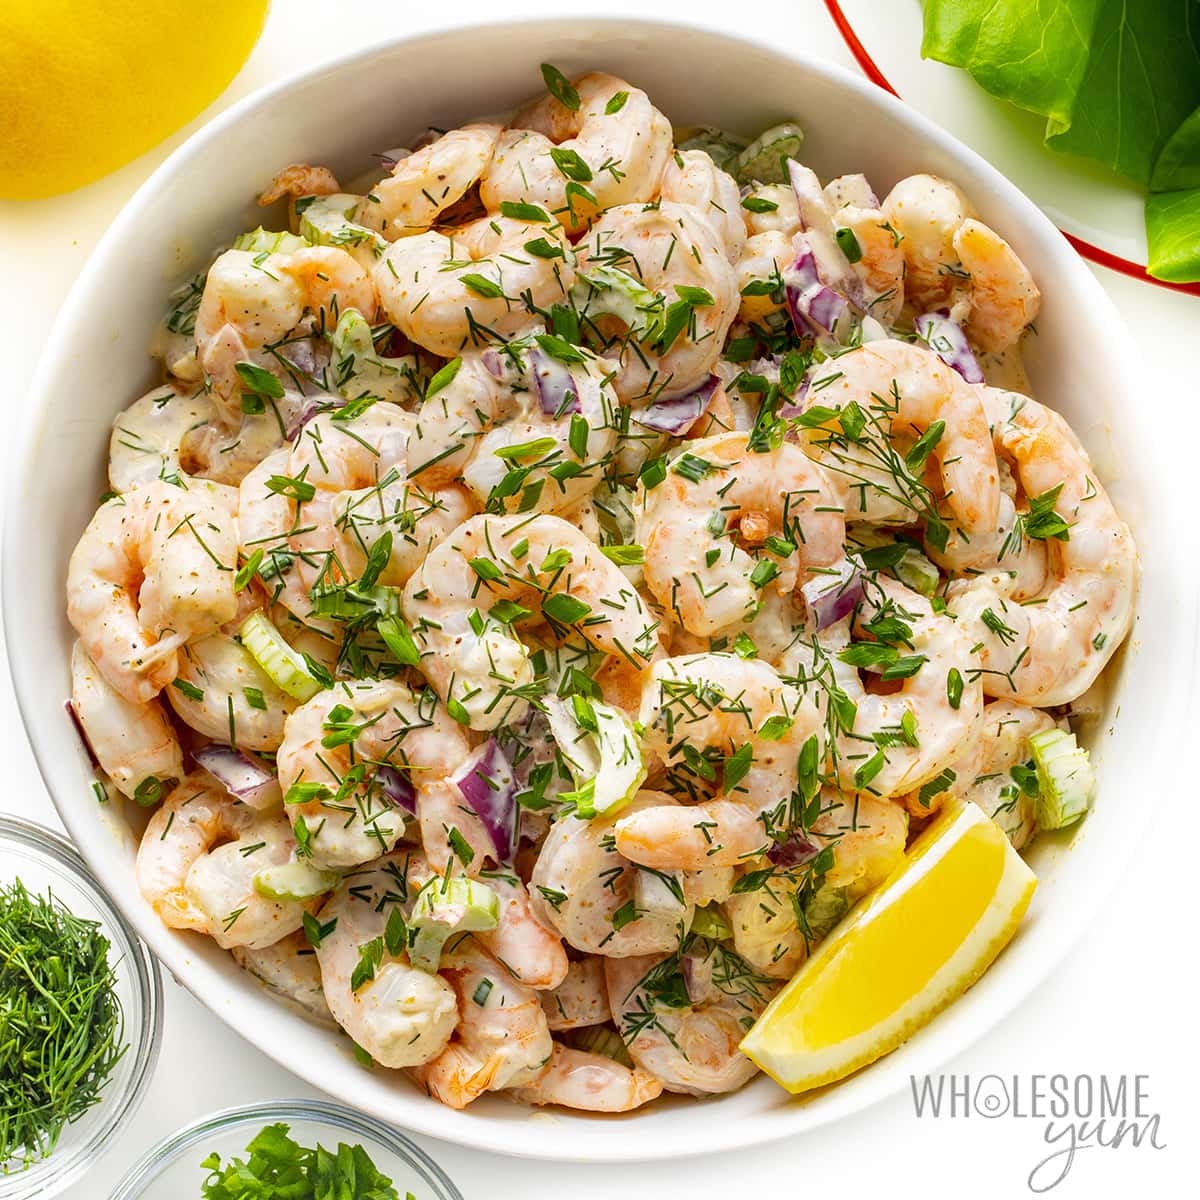 Finished shrimp salad recipe in a bowl with lemon wedge.